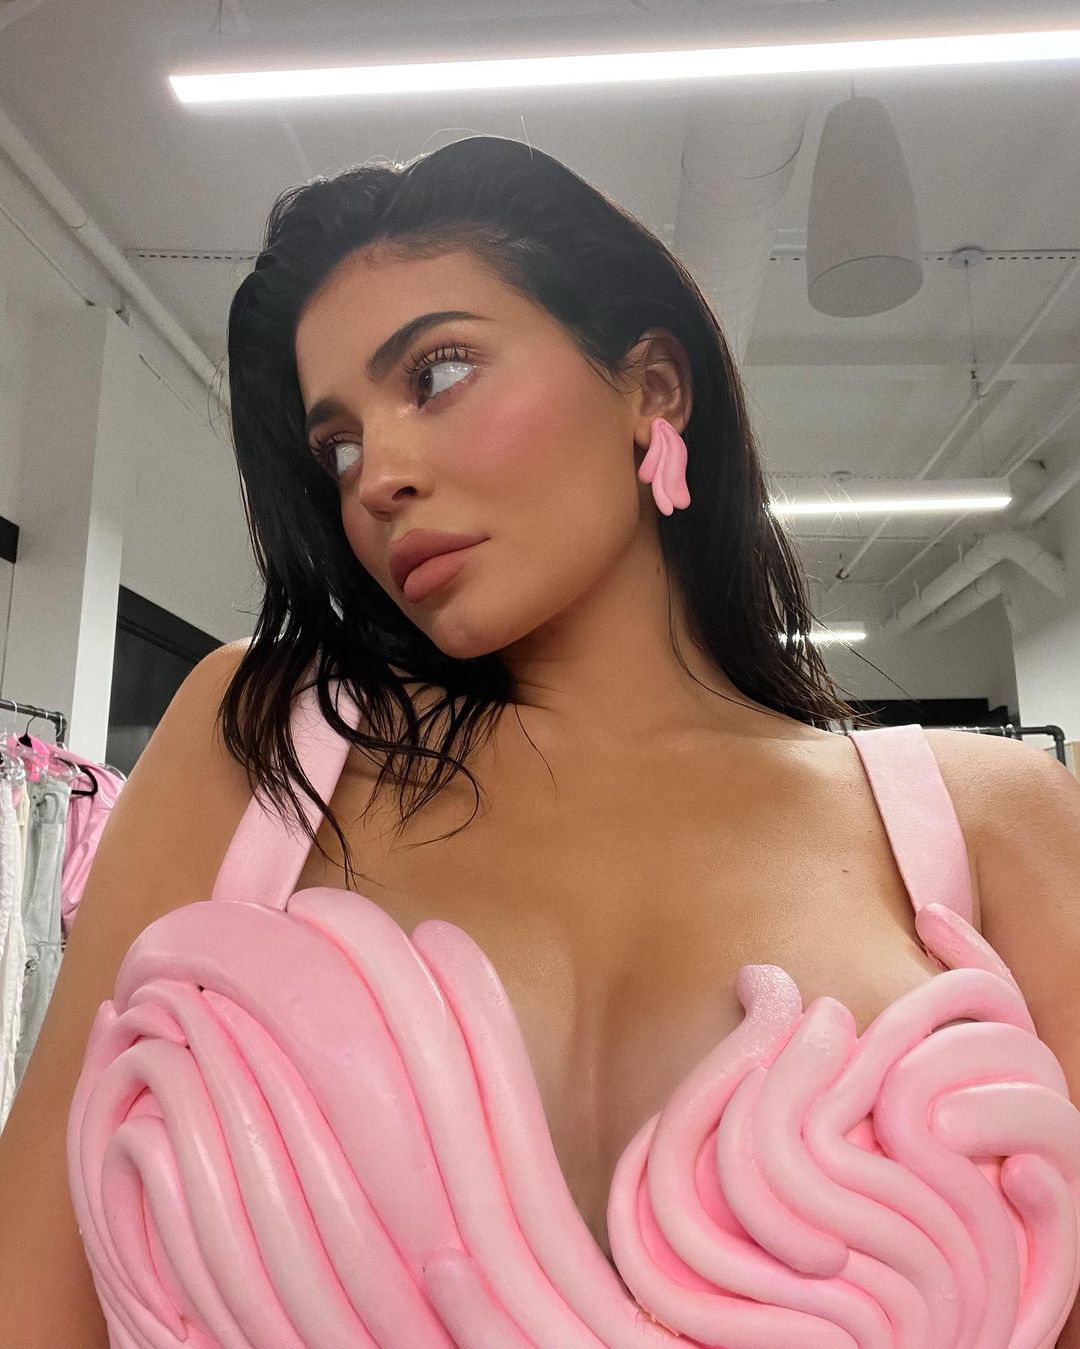 Is Kylie Jenner Pregnant Again?